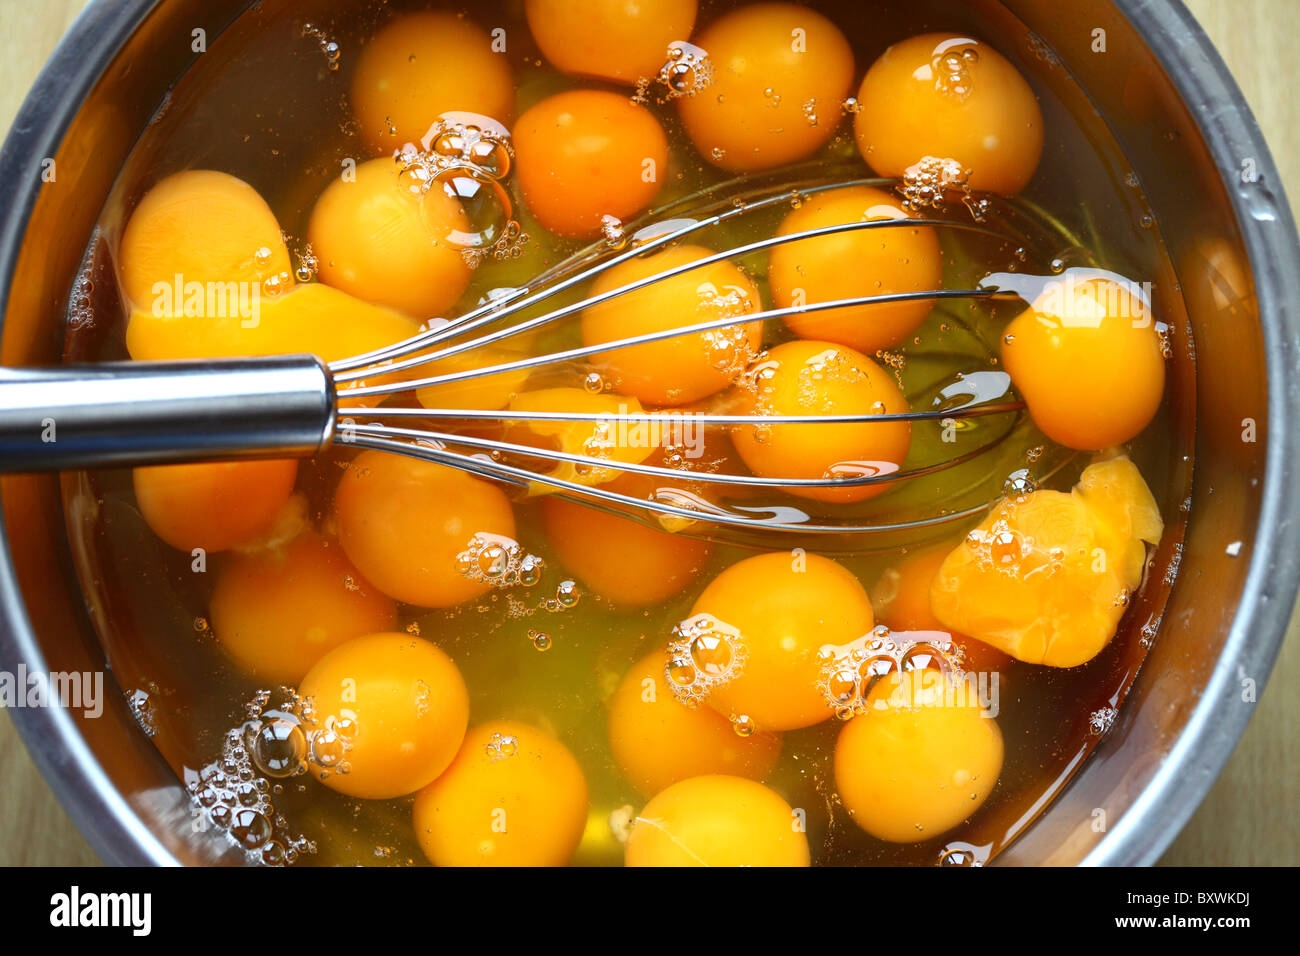 Raw eggs in a bowl, egg white and egg yolk, eggbeater, ready to whisk. Stock Photo